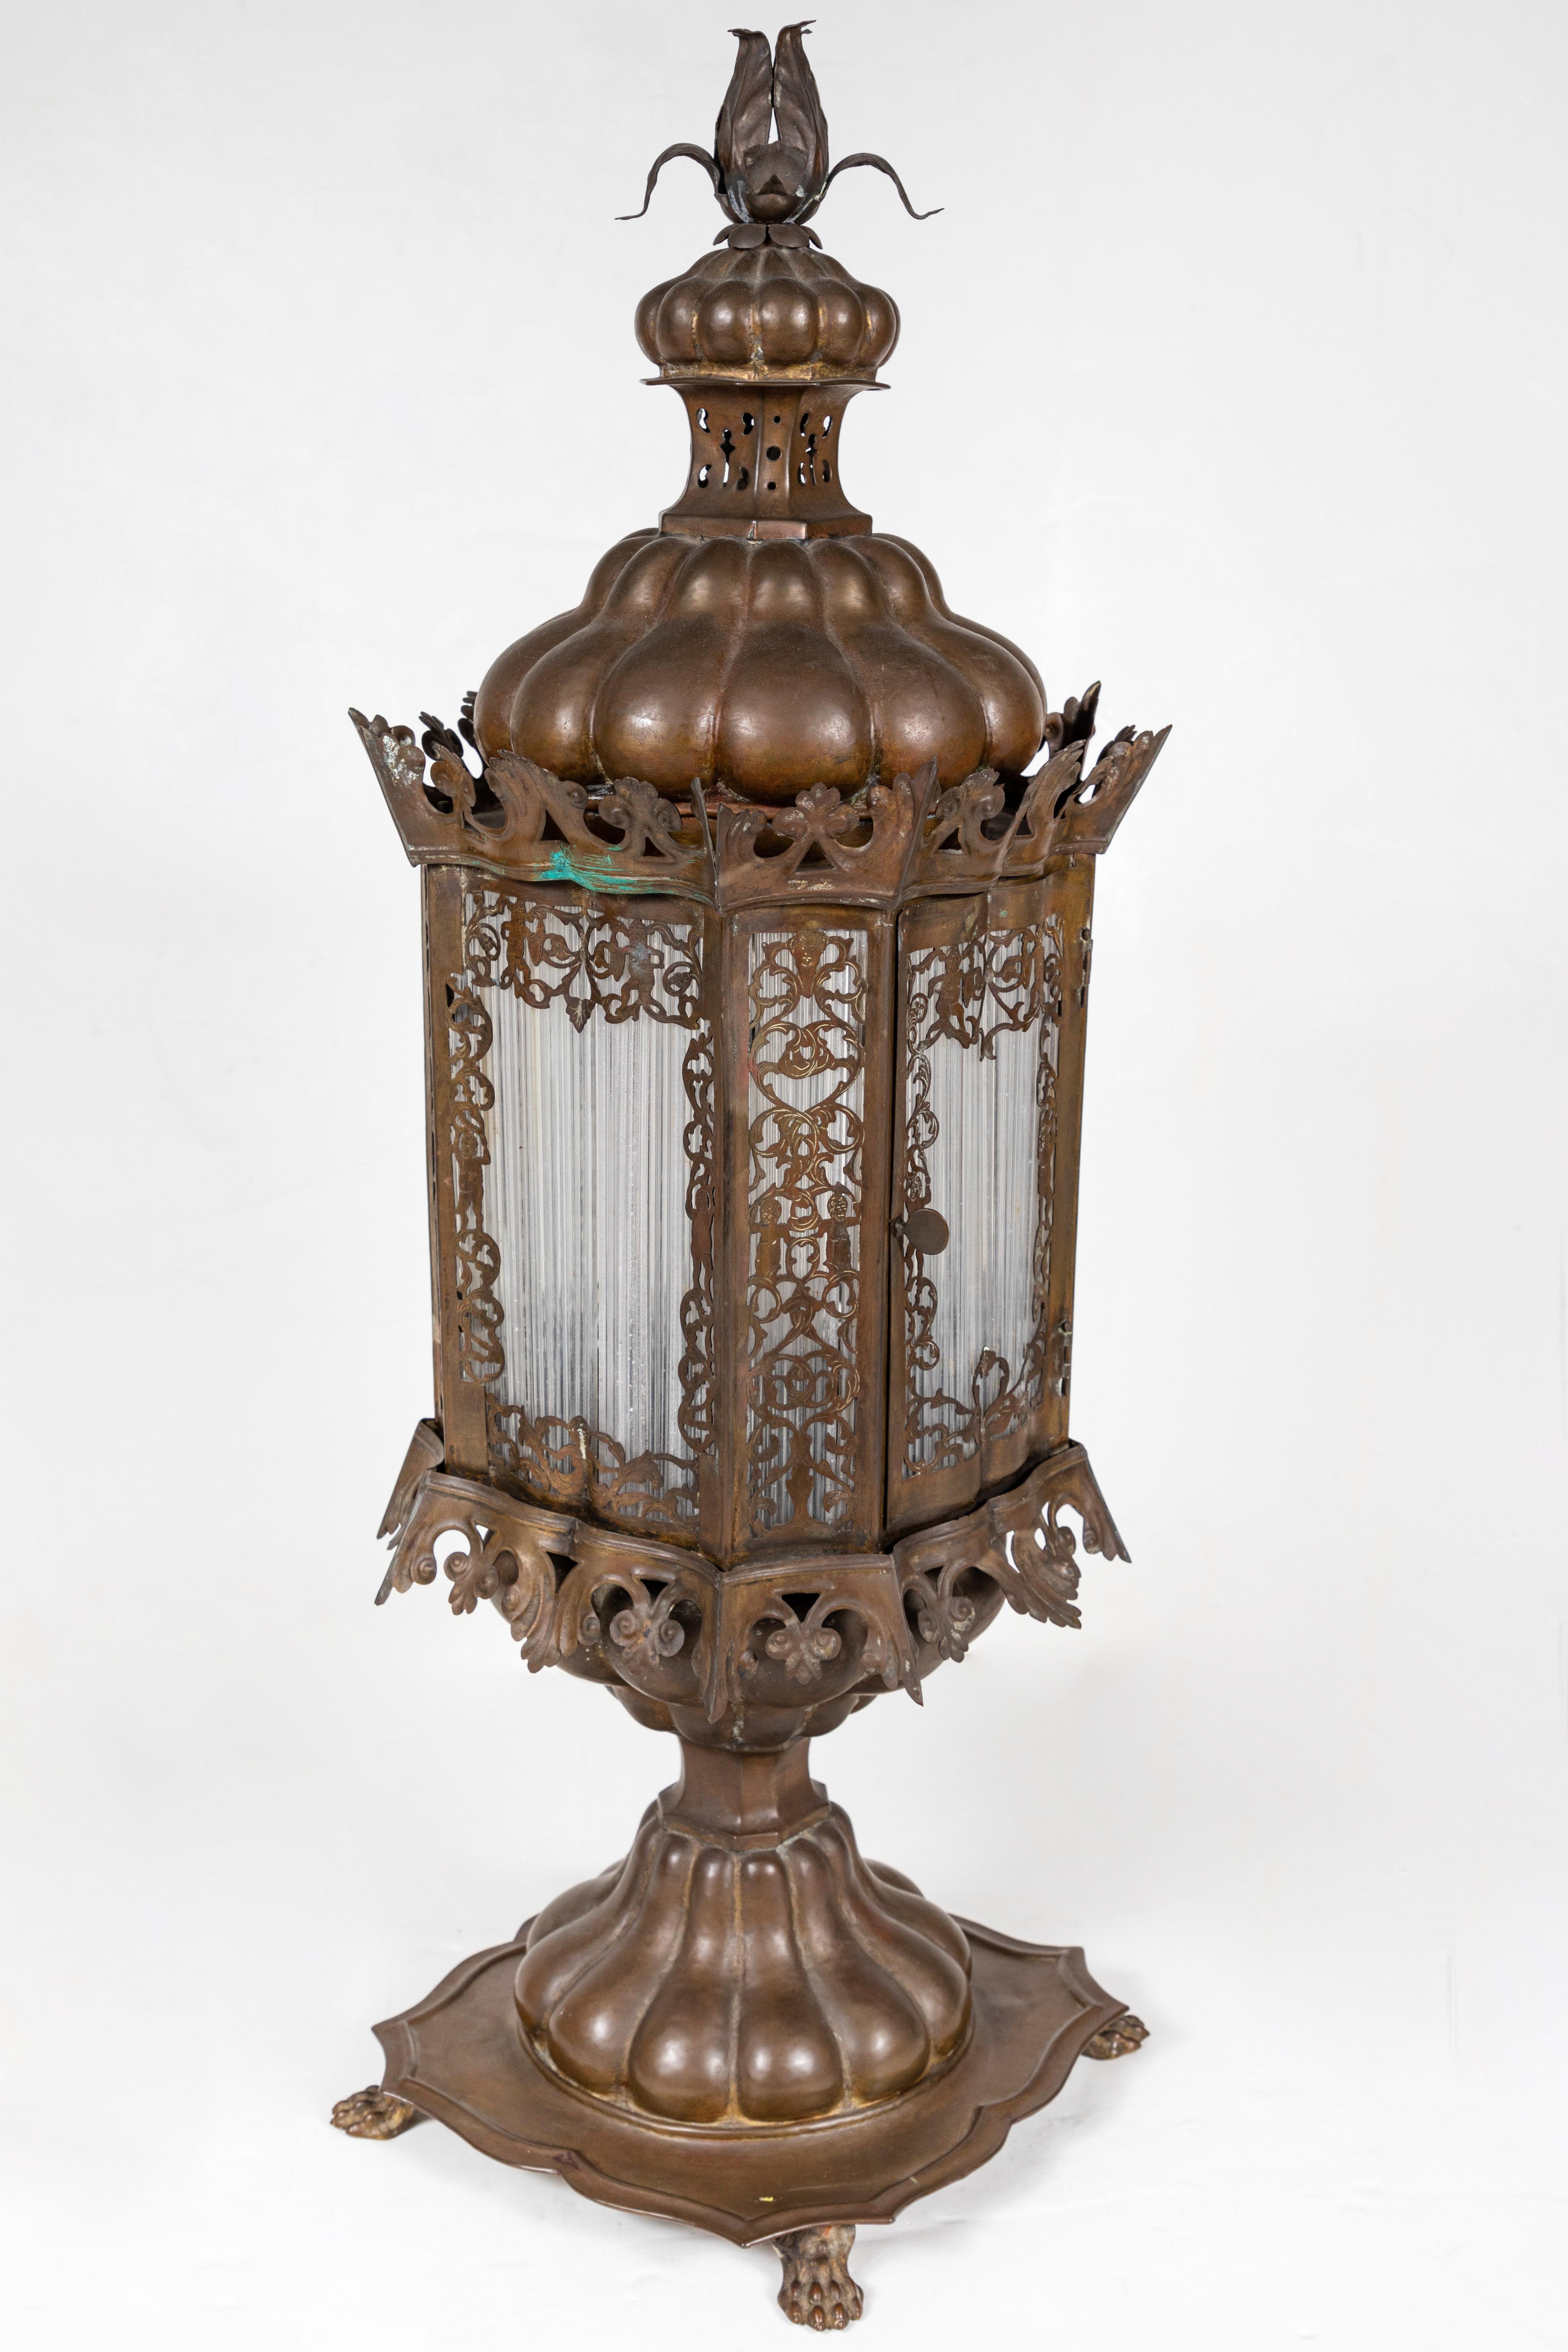 A stunning pair of pierced, hand - done, copper lanterns featuring four opaque, Murano glass-tube windows surrounded by foliate forms and figures. Each with lobed bases and tops, rising to an unfurling, floral finial. Wired for U.S. current.